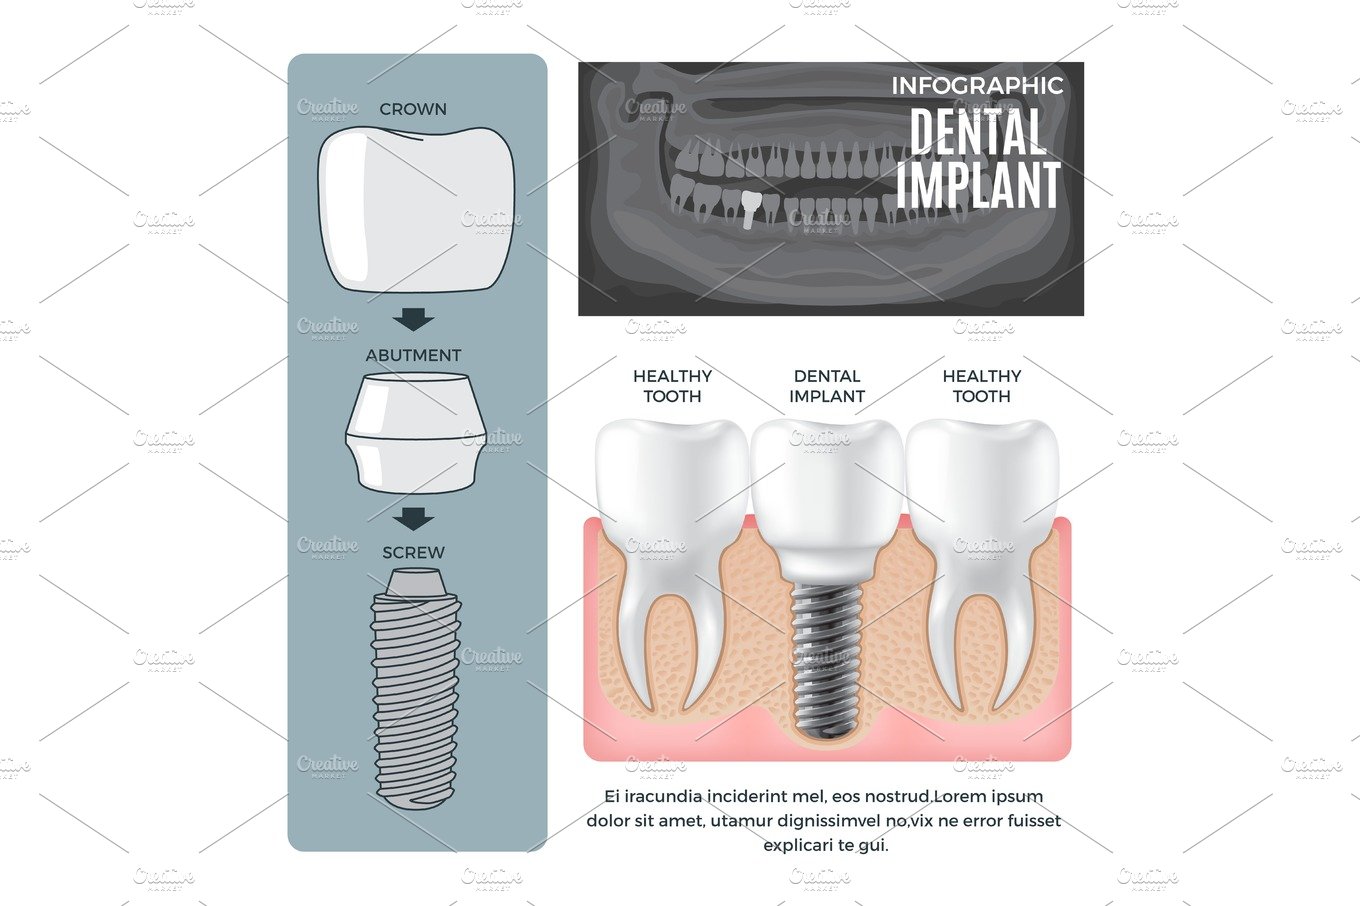 Infographic Dental Implant Structure Info Poster cover image.